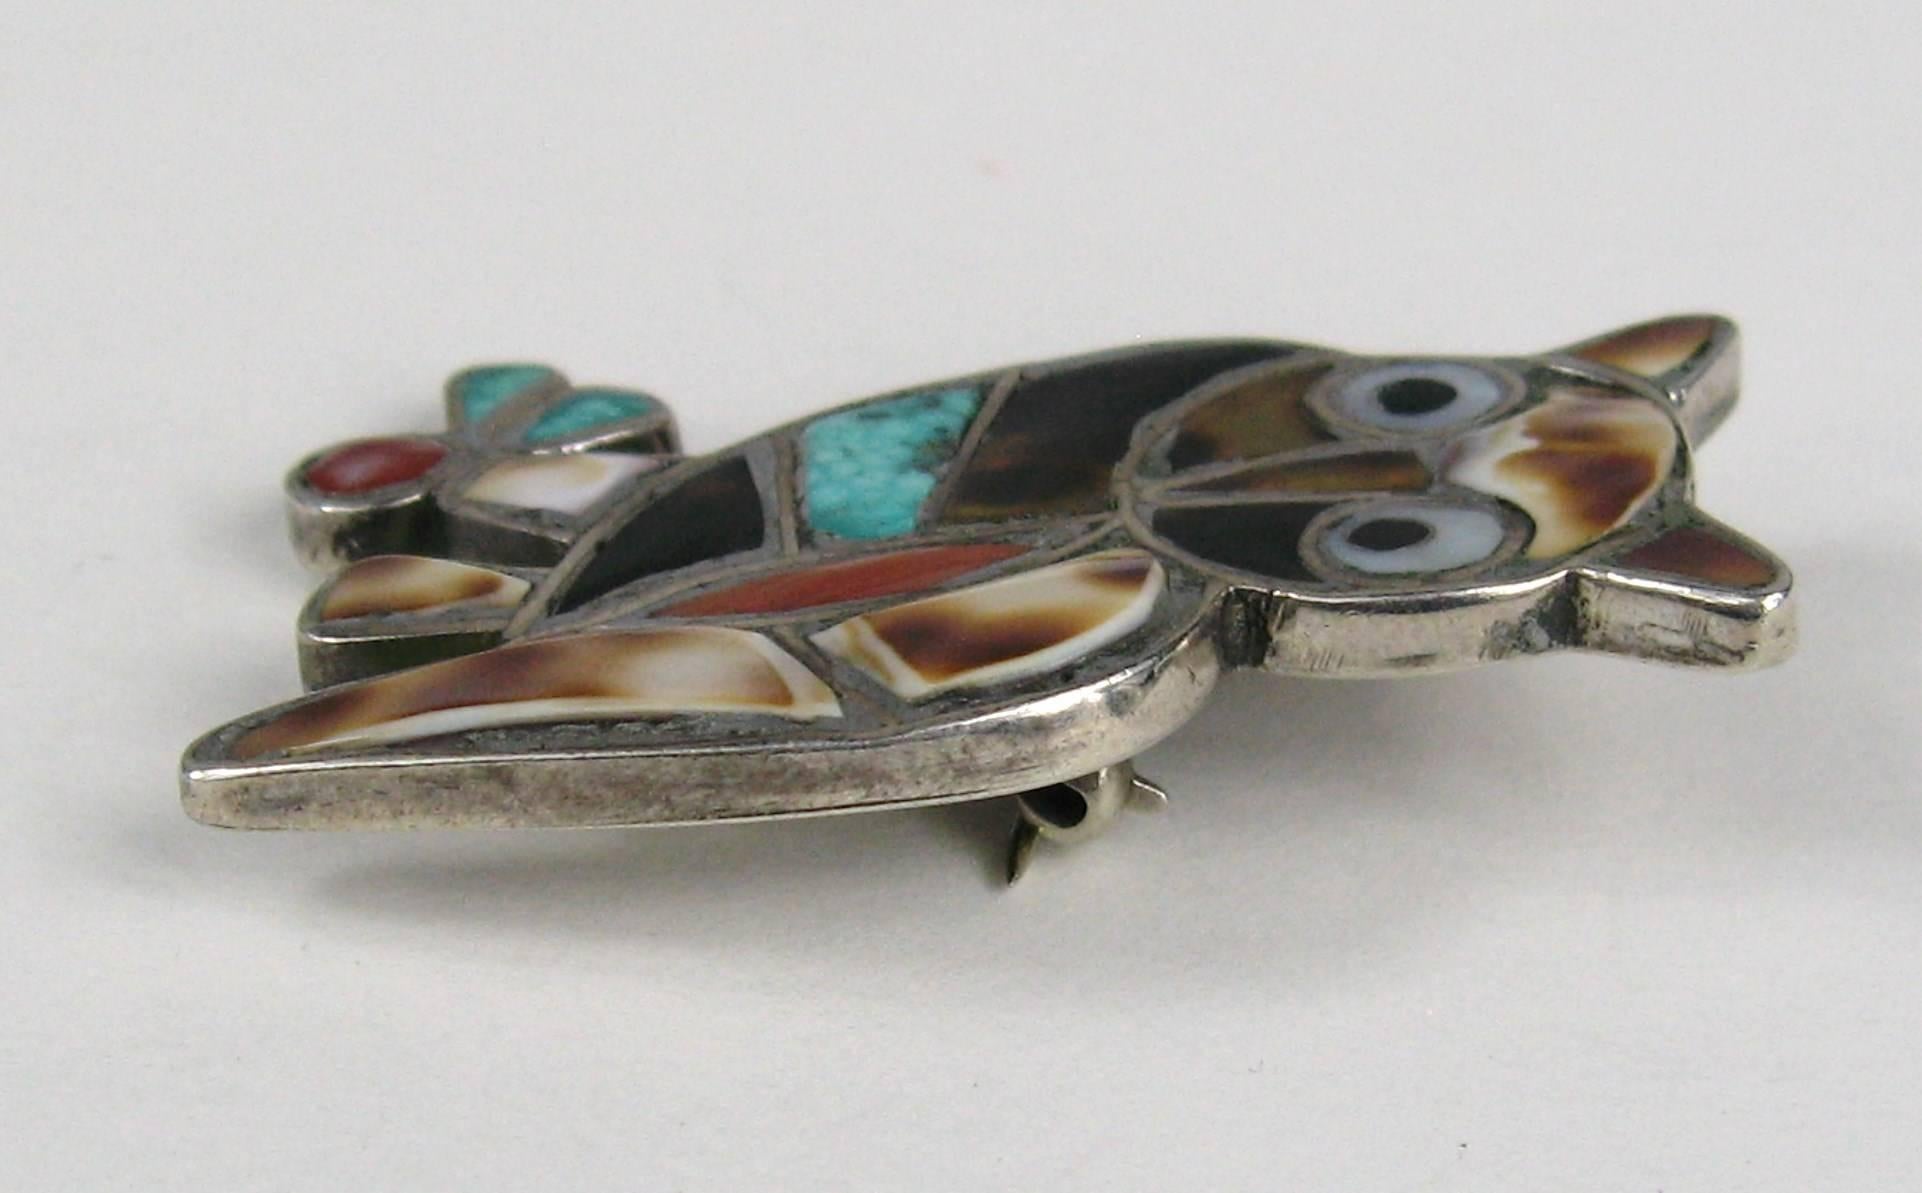 A stunning example of Native American workmanship on this inlaid Zuni Pin. Out of a massive collection of Navajo, Zuni, Hopi and Southwestern Jewelry 
The brooch is Pawn, purchased out west in the early 1970s and 1980s. This measures 1.7 inches x